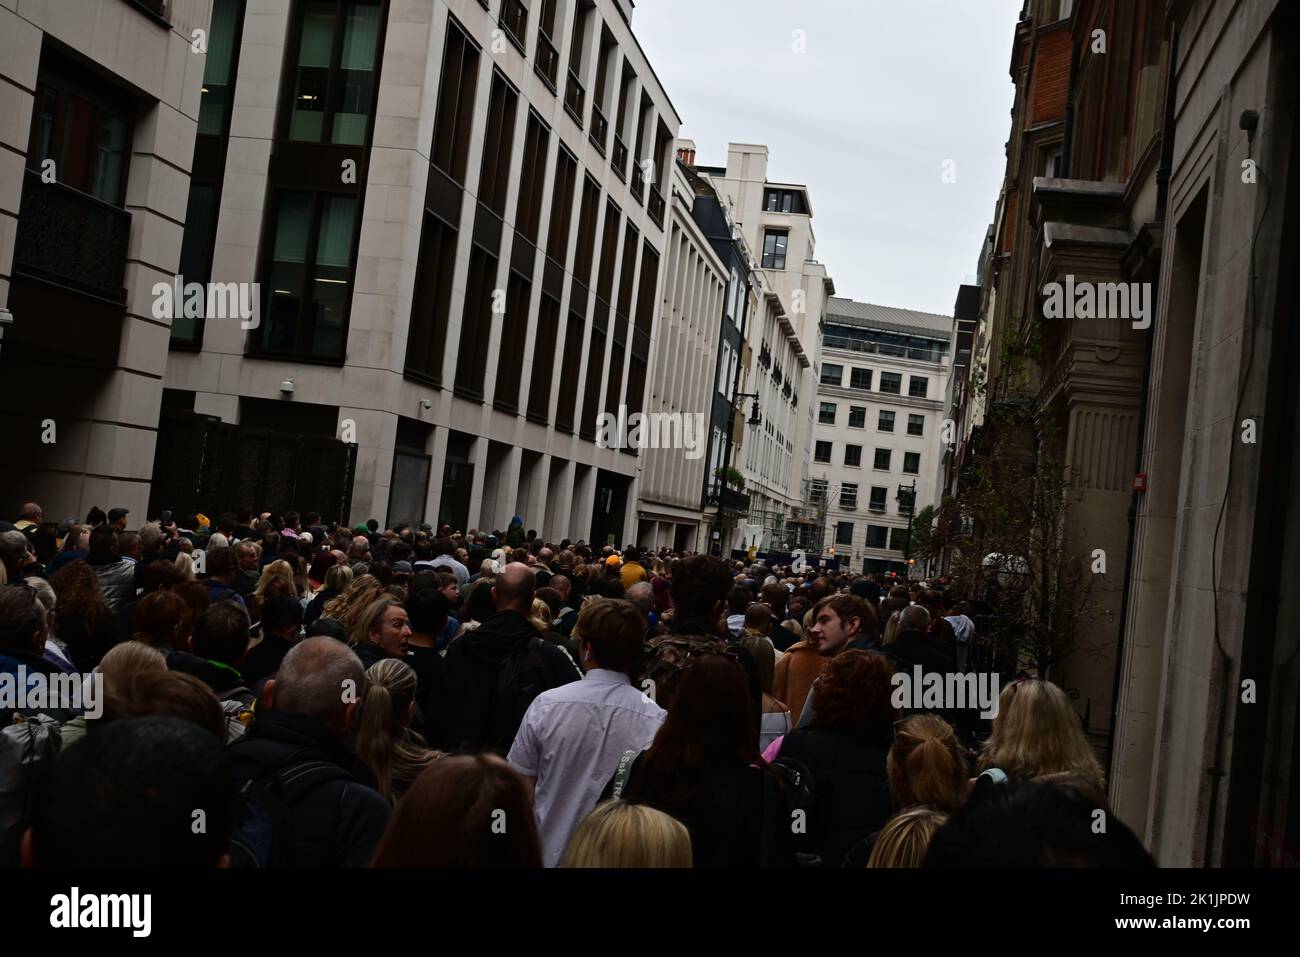 State funeral of Her Majesty Queen Elizabeth II, London, UK, Monday 19th September 2022. Crowd congestion on Bolton Street. Stock Photo